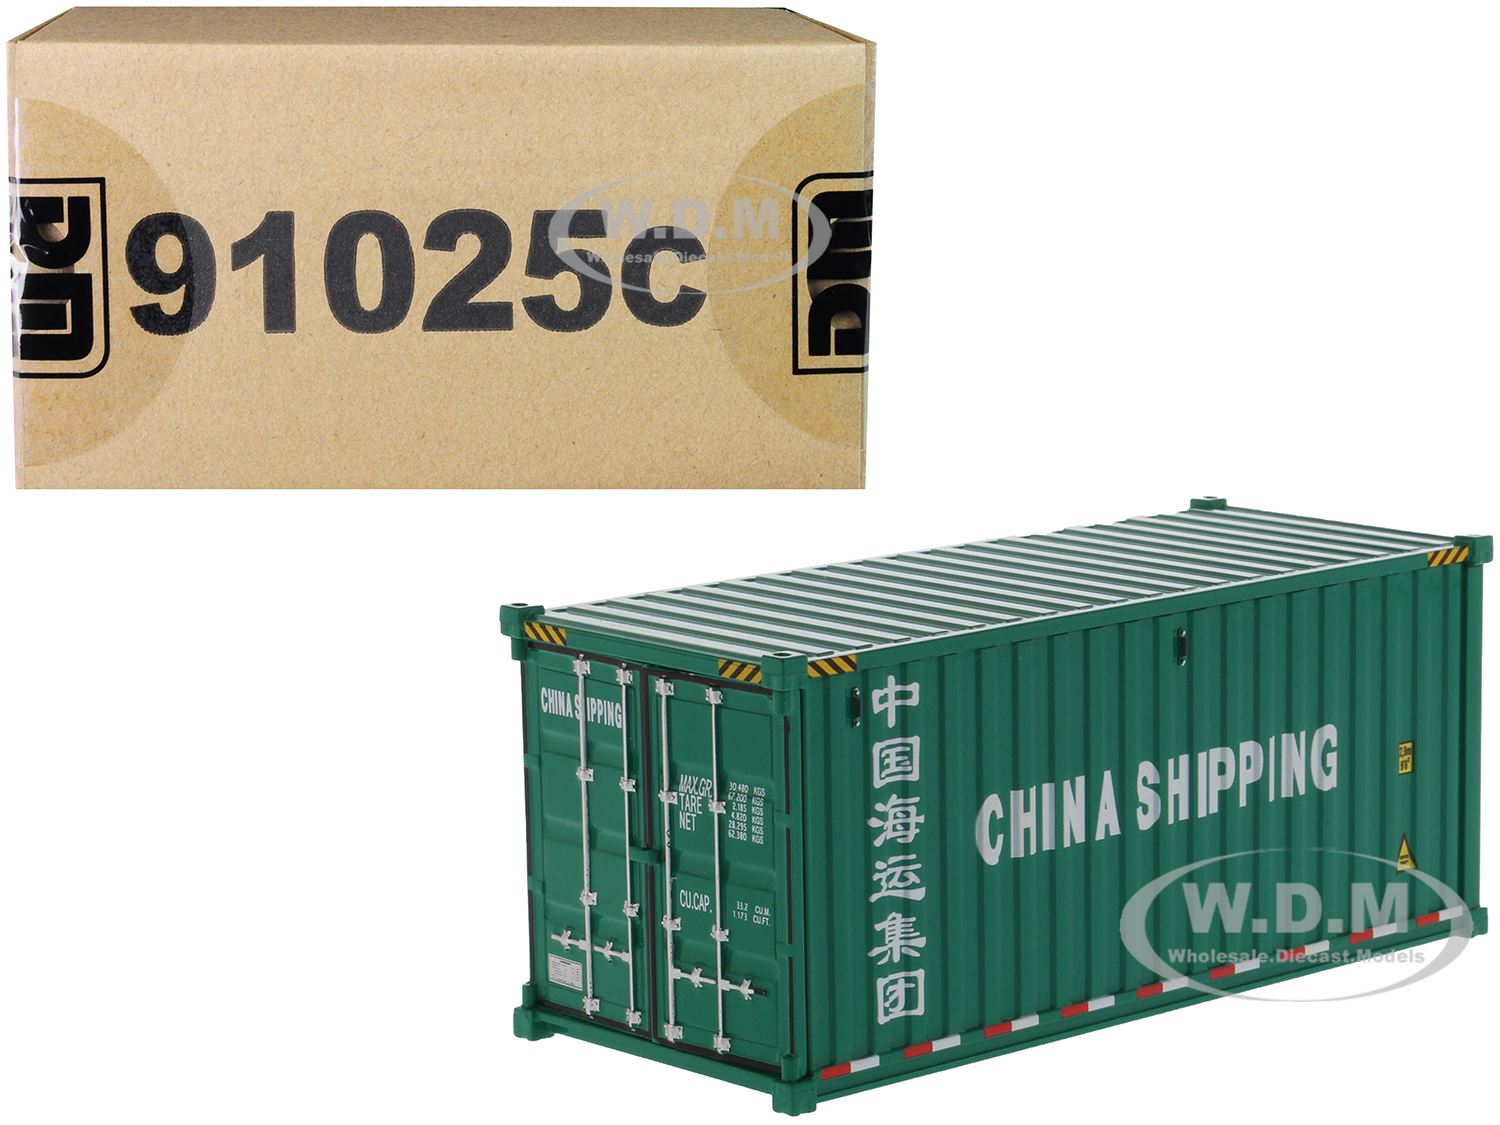 20 Dry Goods Sea Container "China Shipping" Green "Transport Series" 1/50 Model by Diecast Masters